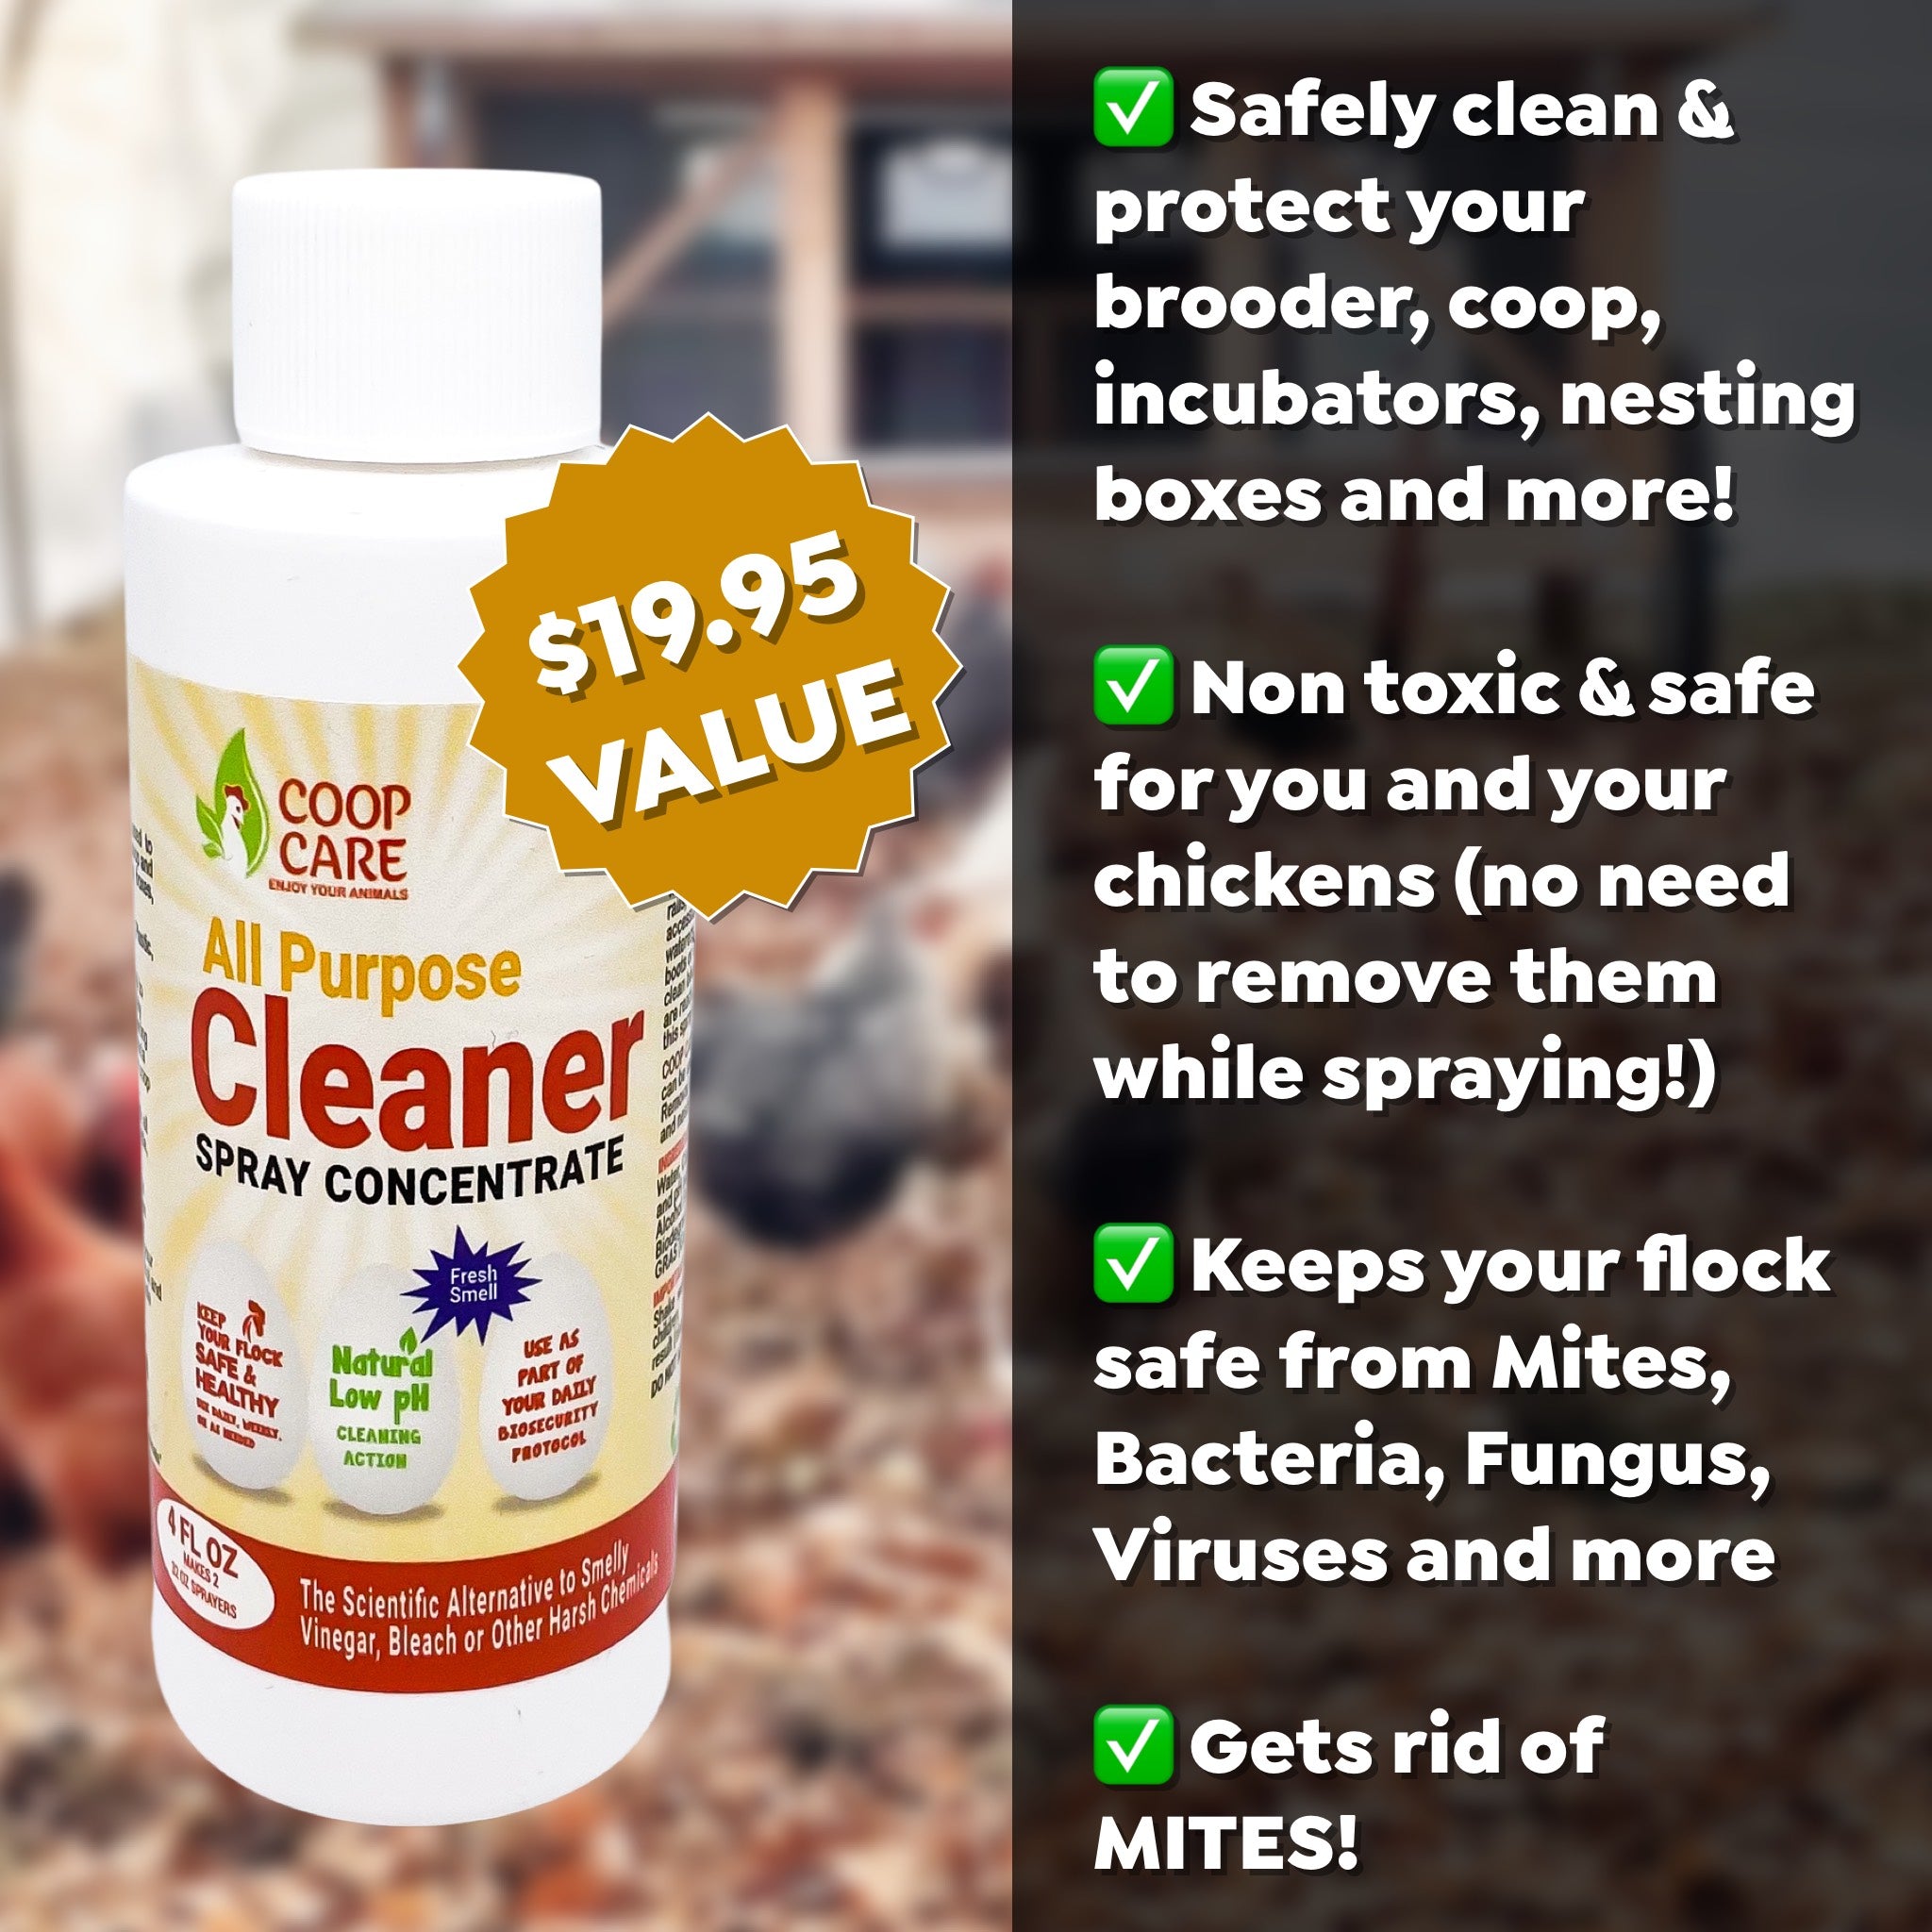 2 Bottles of Chick Fresh Concentrate, 24oz Chick Fresh Spray Bottle & 4oz Coop Cleaner